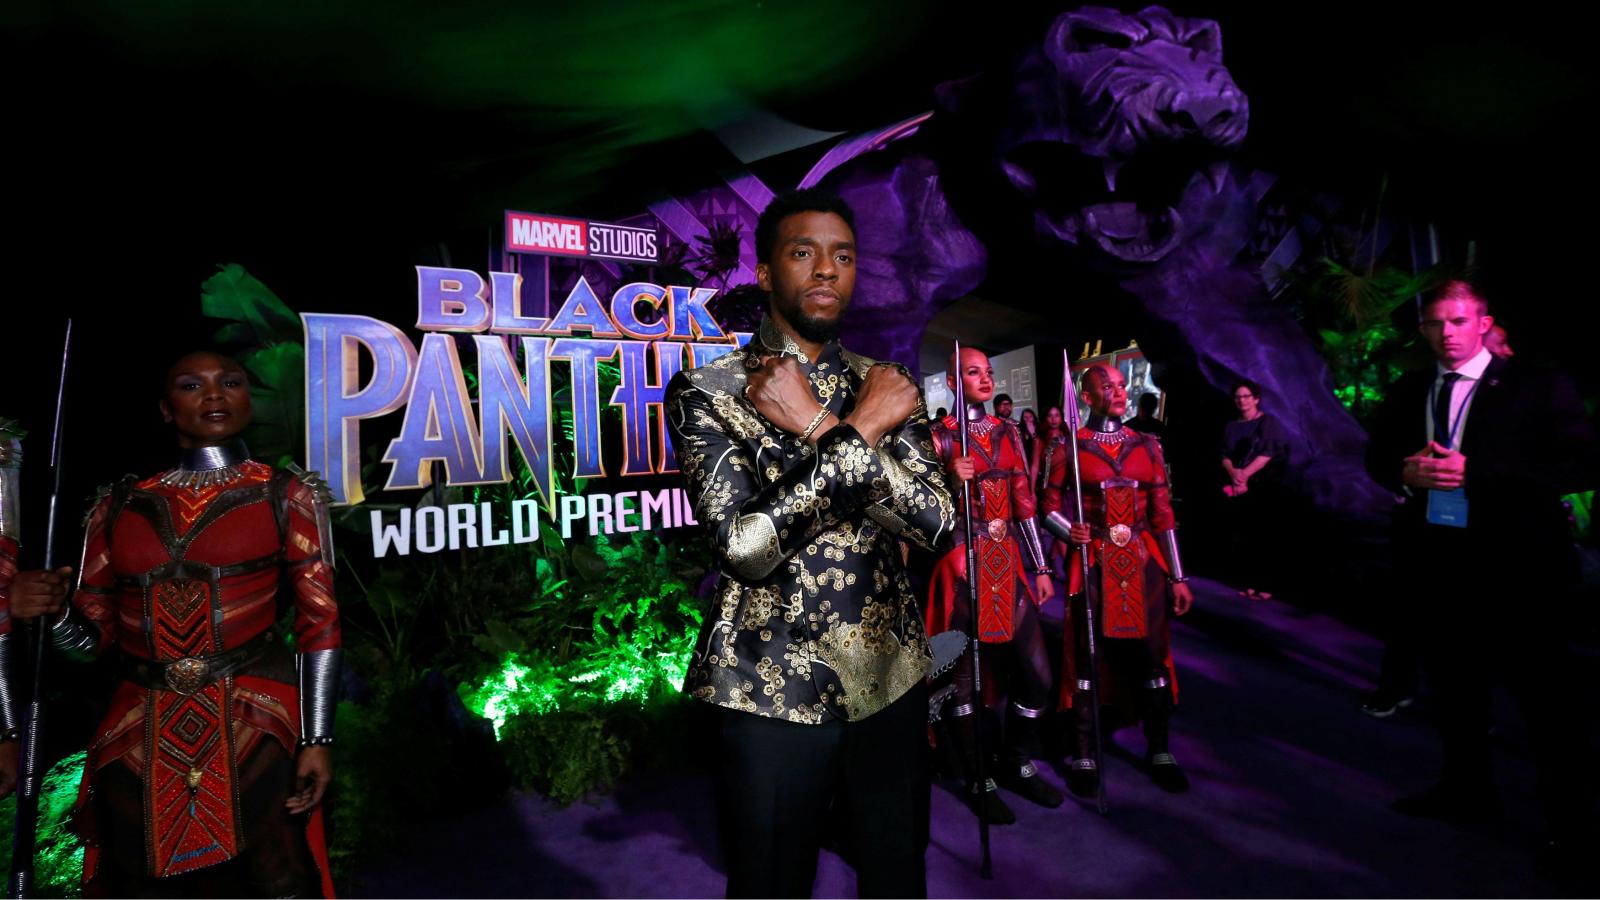 Black Panther: The “Wakanda Forever” salute has become a symbol of black excellence